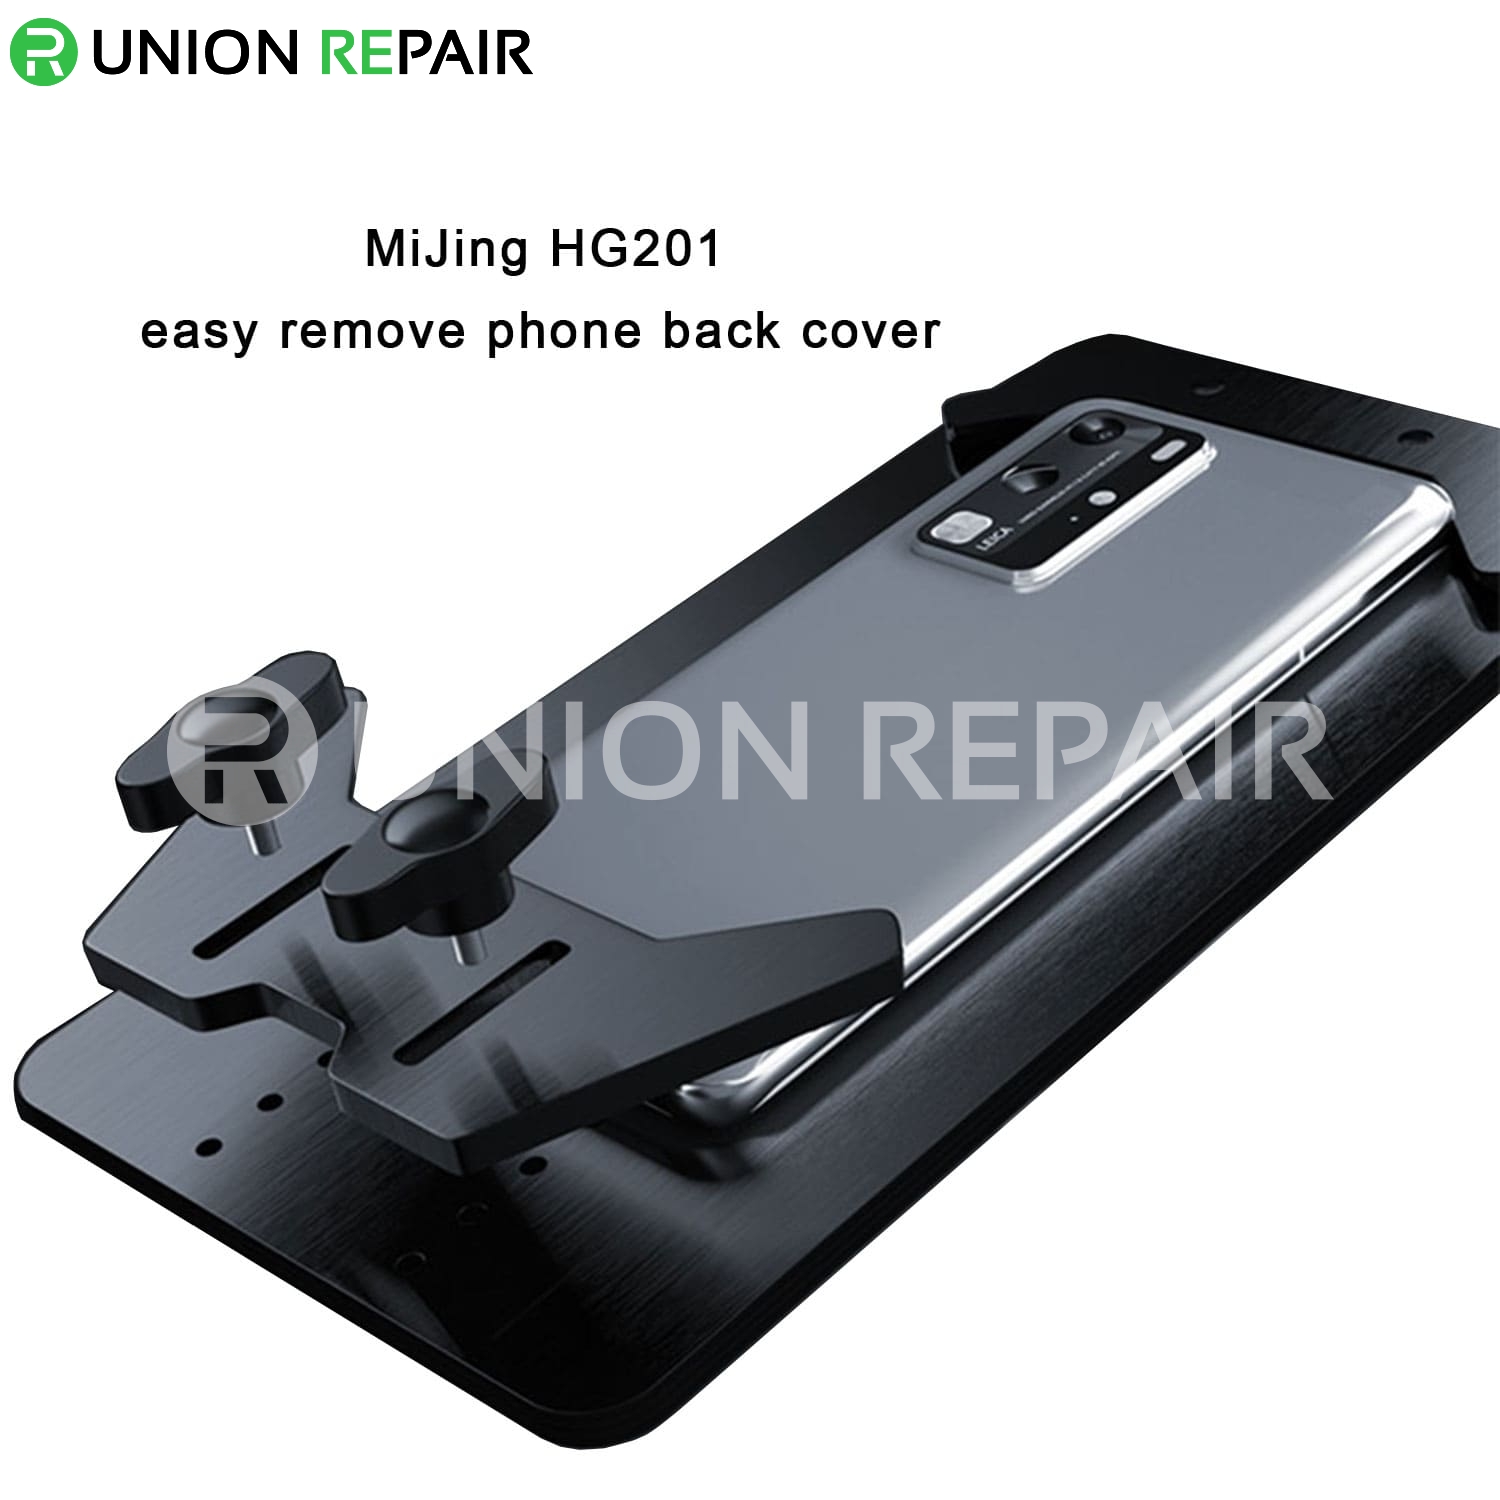 Mijing HG201 Universal Fixture for Phone Removal/Repair Back Cover Glass